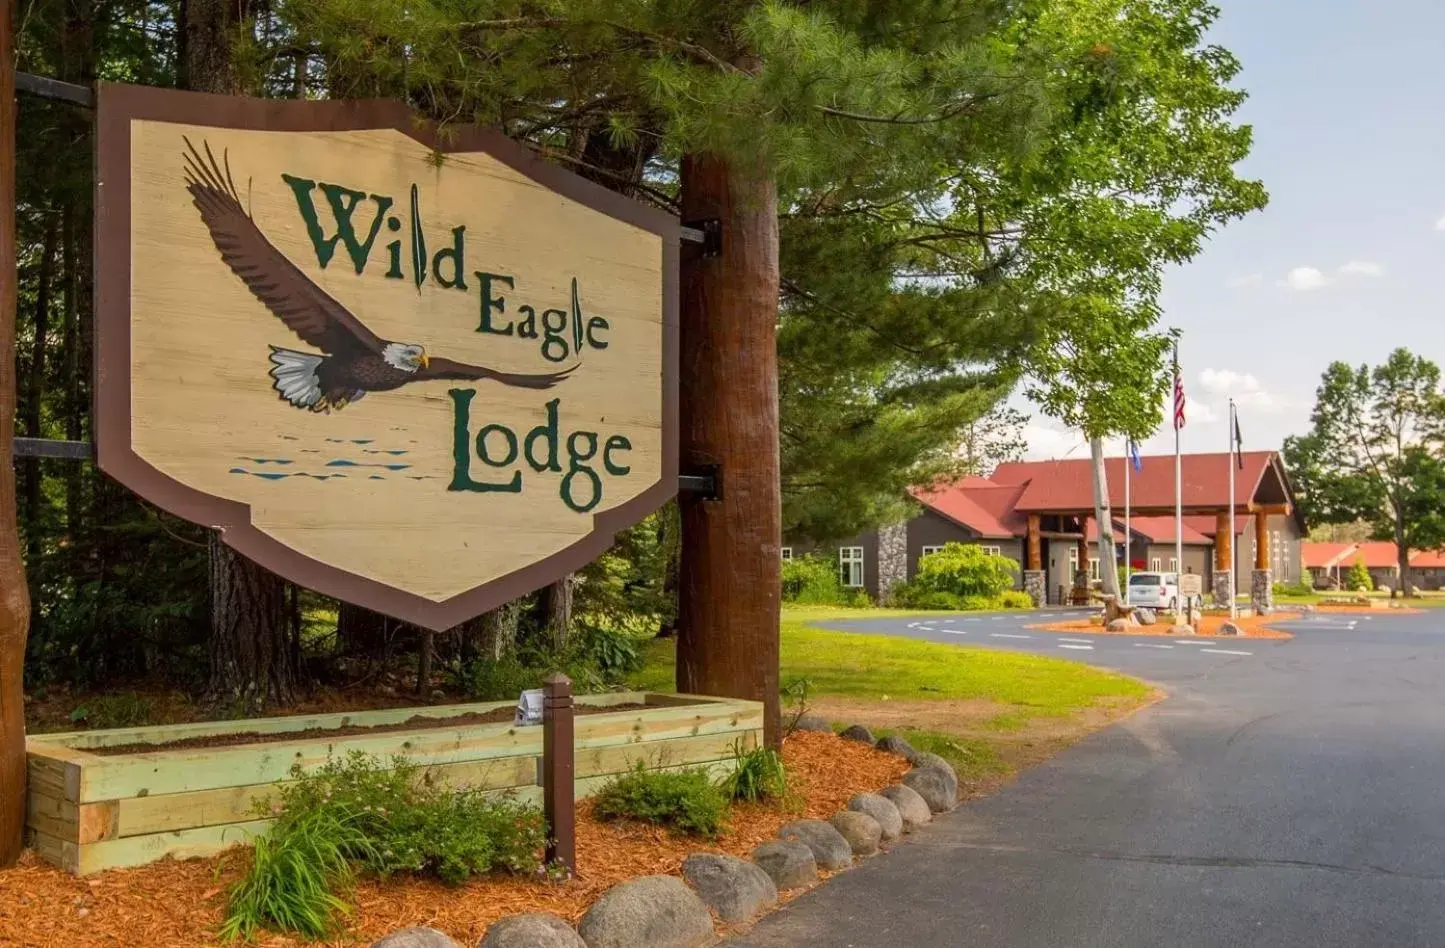 Property Building in Wild Eagle Lodge